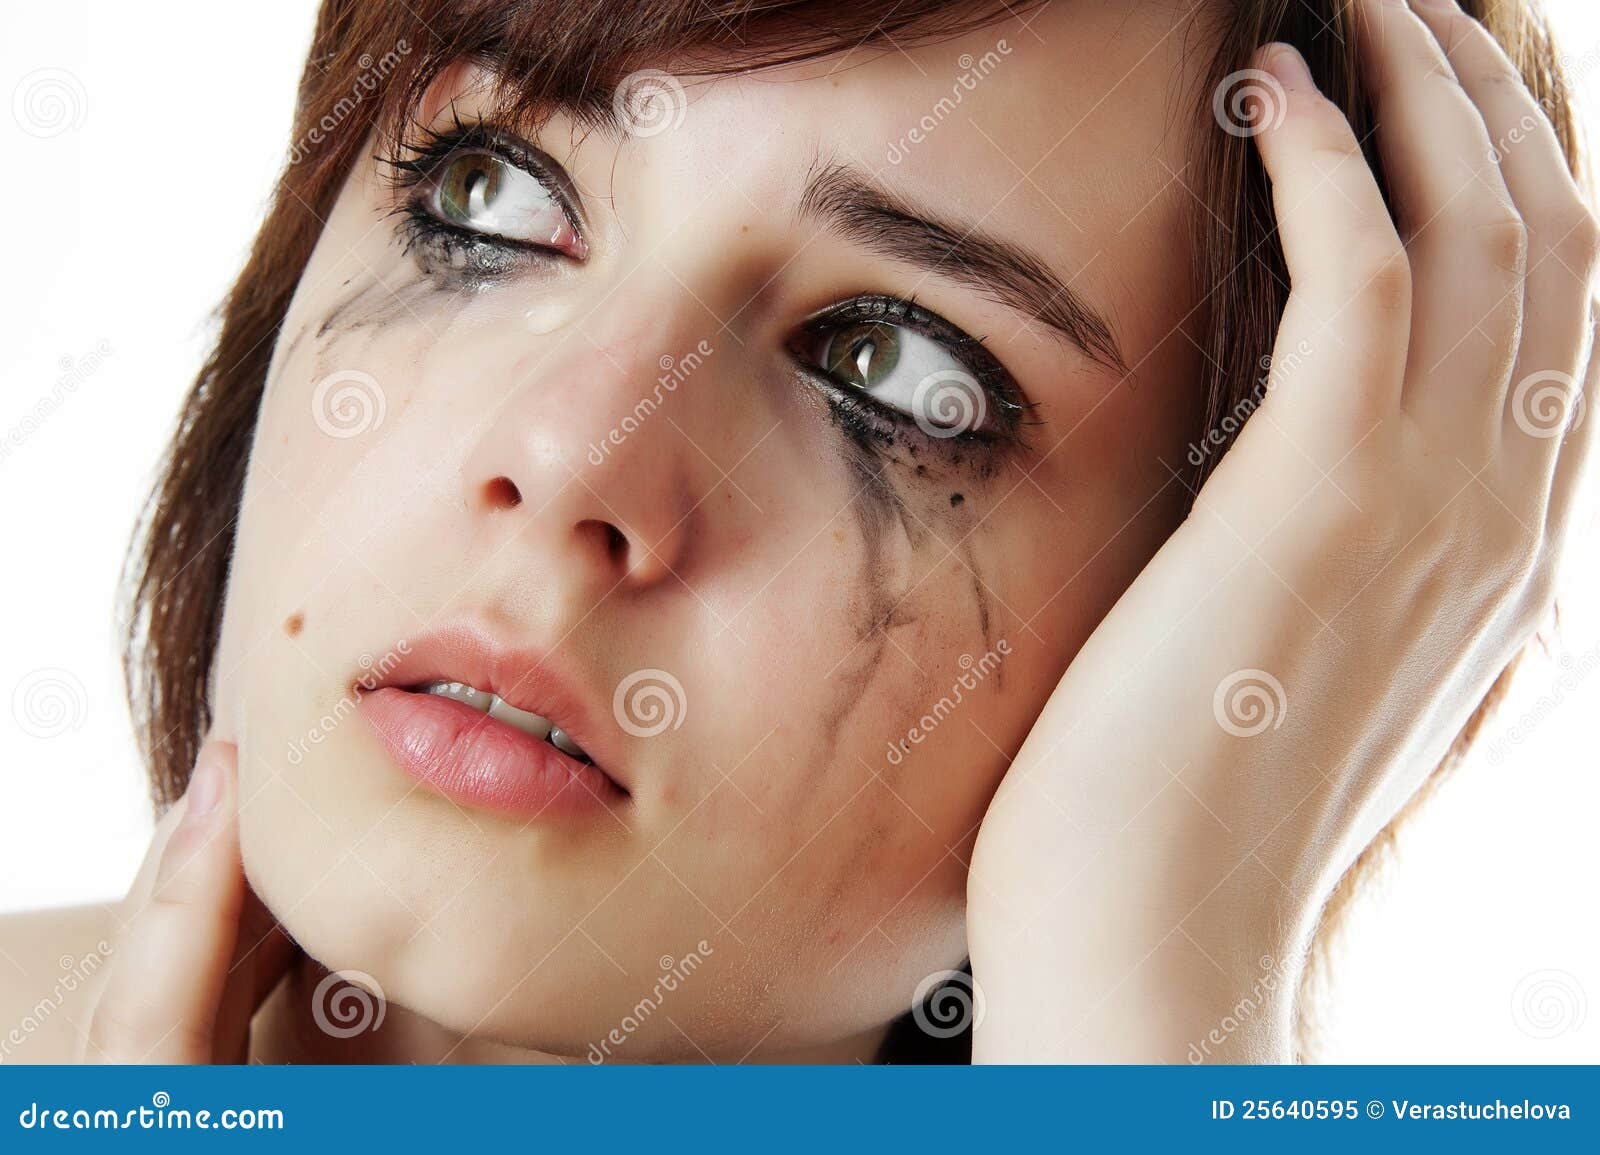 Crying girl stock image. Image of care, soft, allergies - 25640595